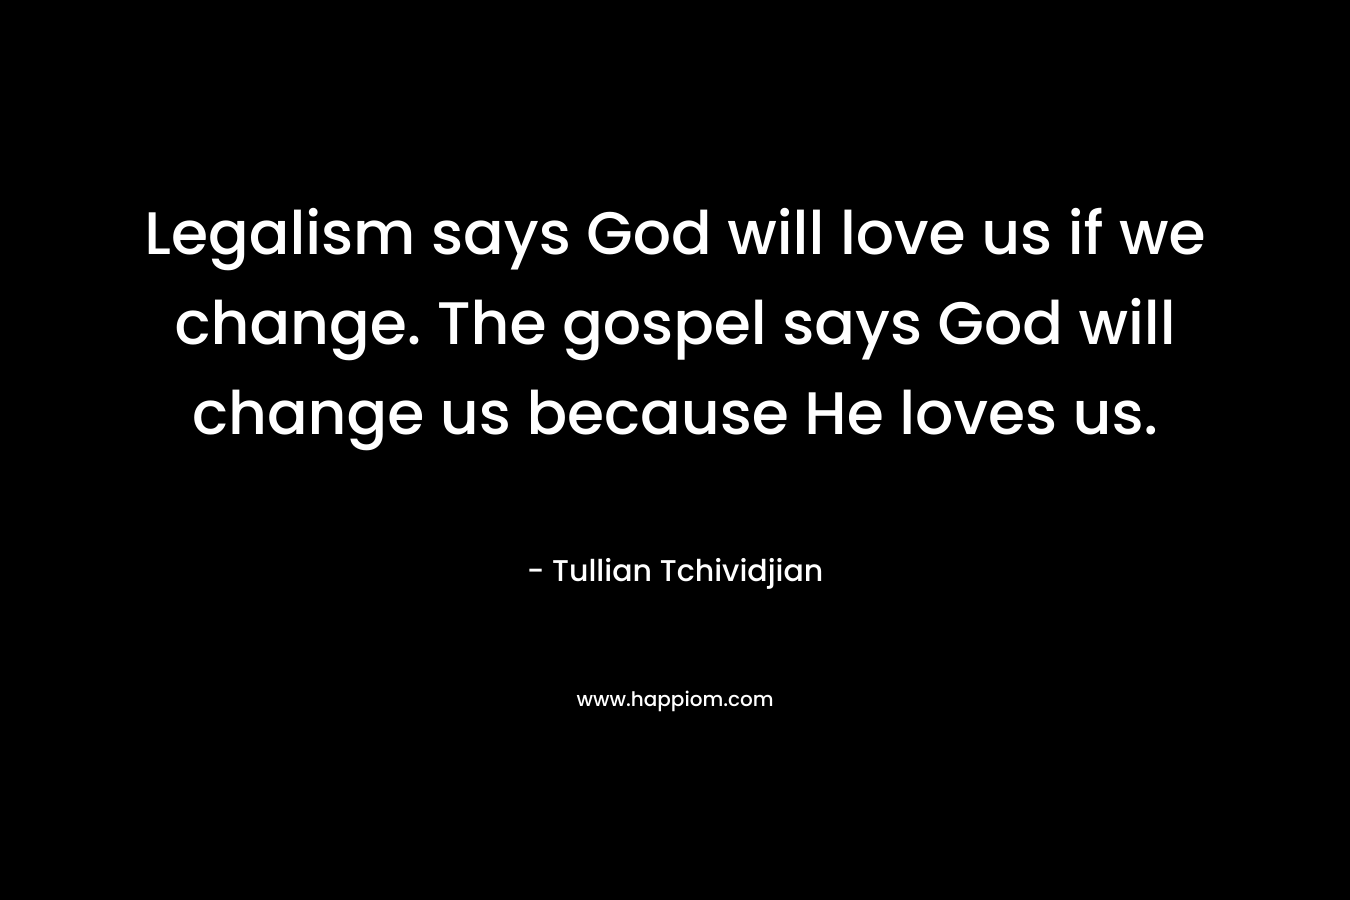 Legalism says God will love us if we change. The gospel says God will change us because He loves us.